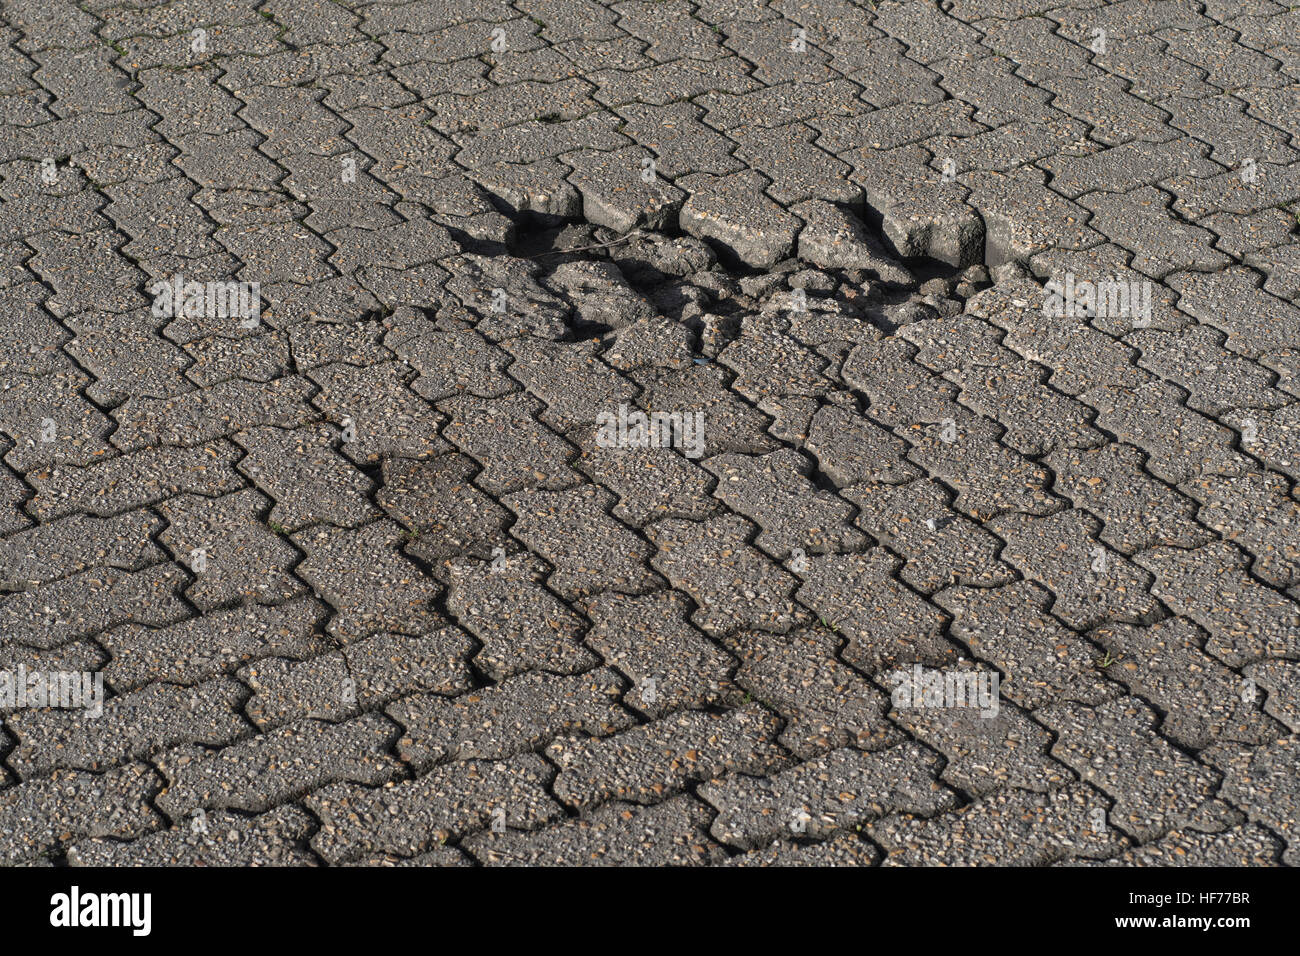 Industrial yard / brick road surface with pothole. Potential for infrastructure abstract concept. Possible poor workmanship metaphor. Stock Photo